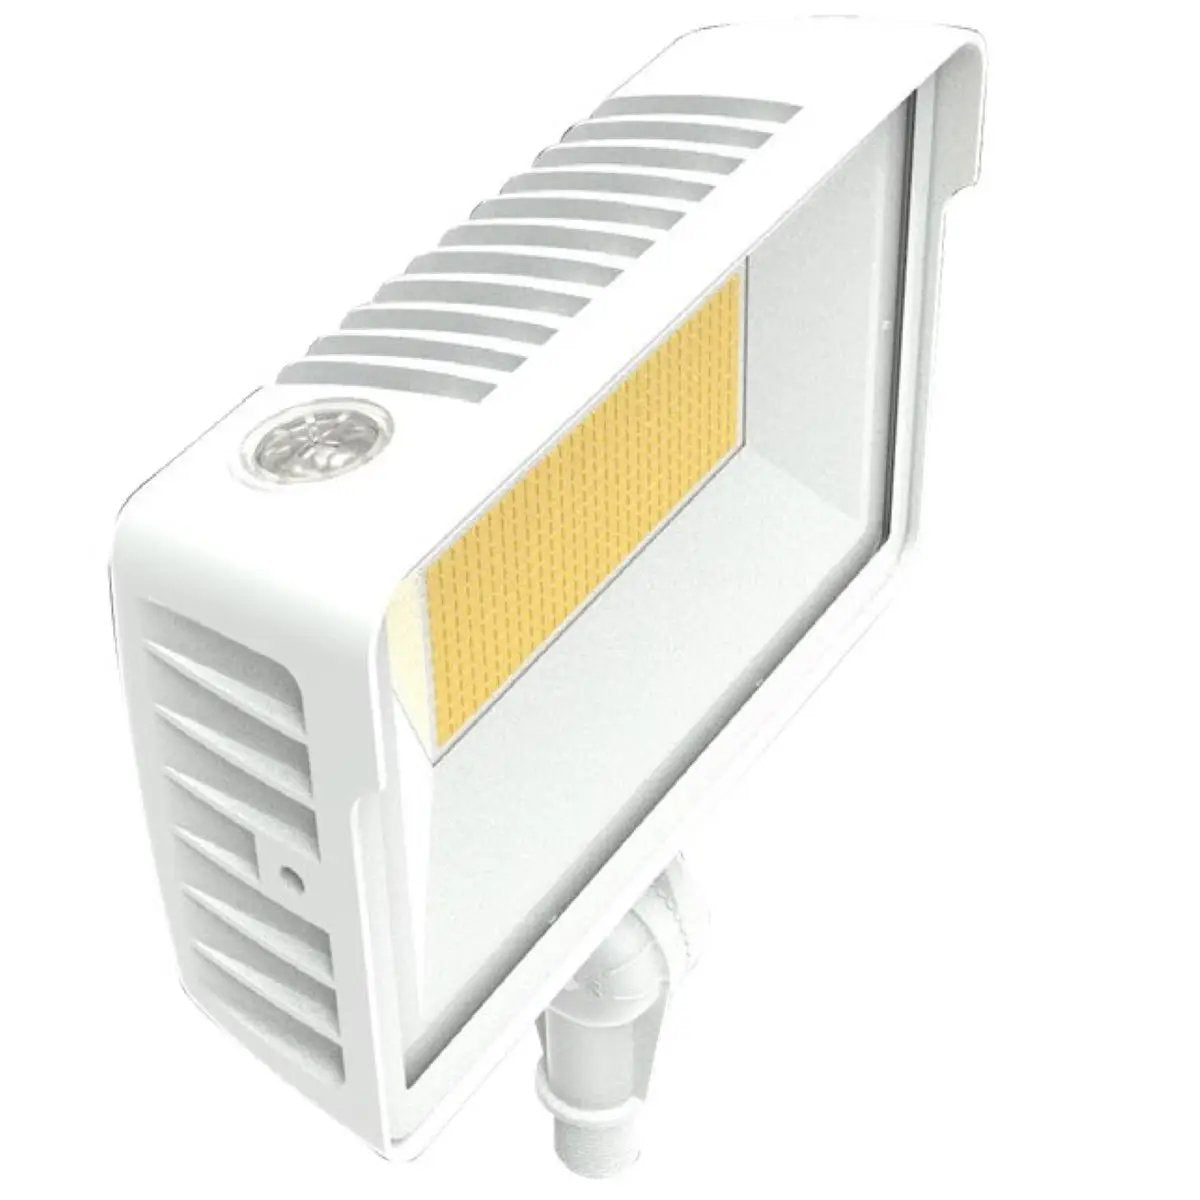 A Keystone Technologies Dusk to Dawn Flood Light with color selectable white light. Provides 8580 lumens, universal mounting options, and built-in dusk-to-dawn photocell for energy savings. UL Listed, IP65 Rated, DLC Premium Listed. 5-year warranty.